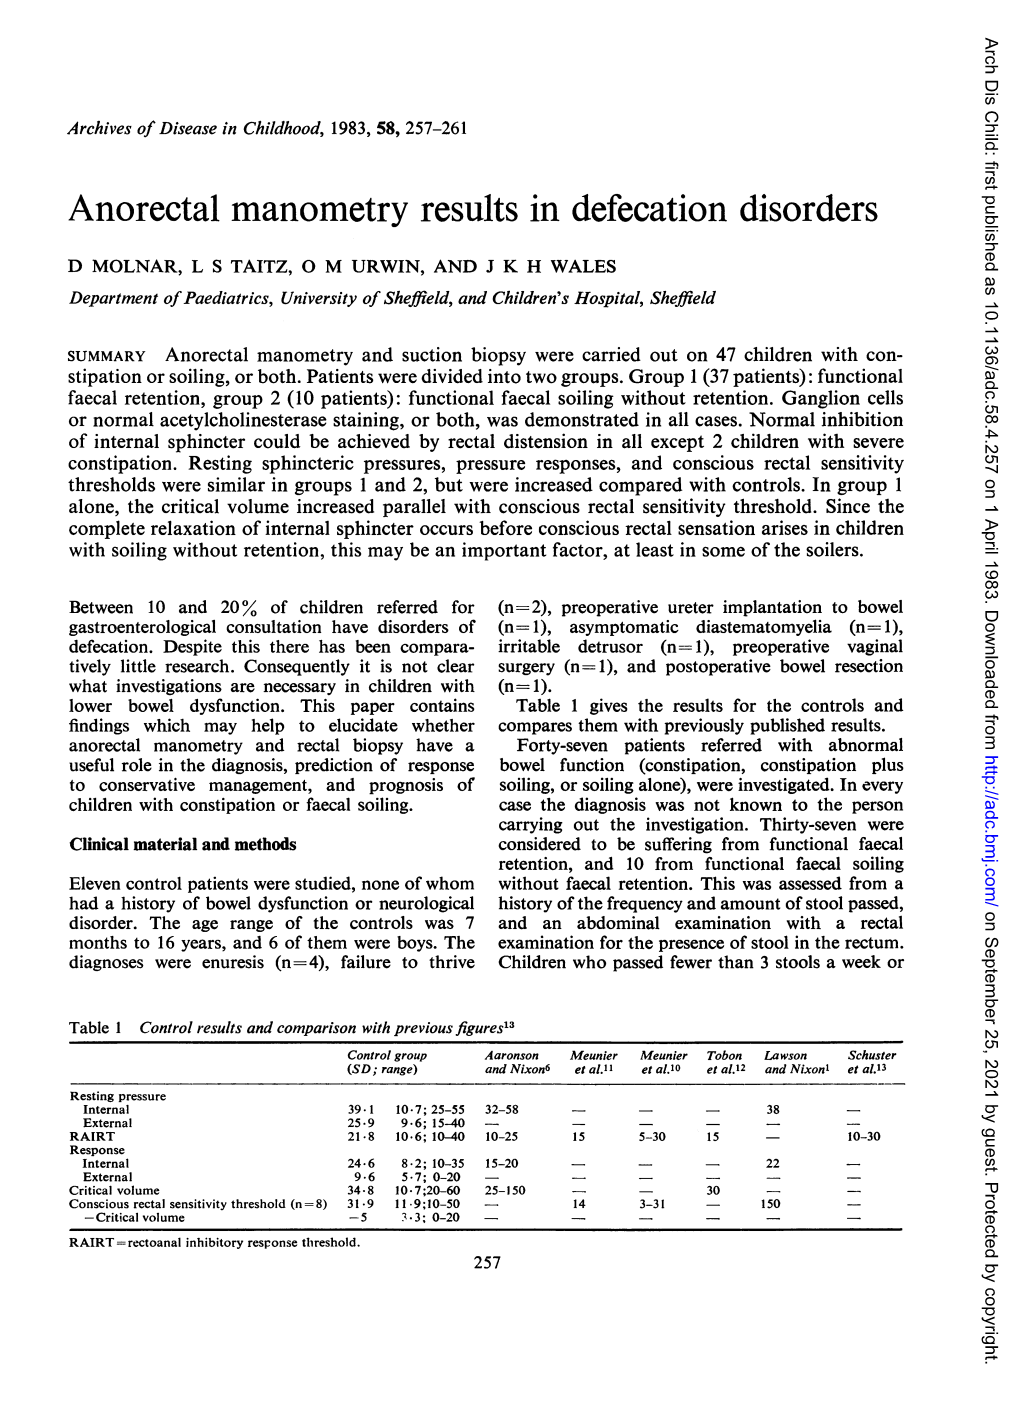 Anorectal Manometry Results in Defecation Disorders